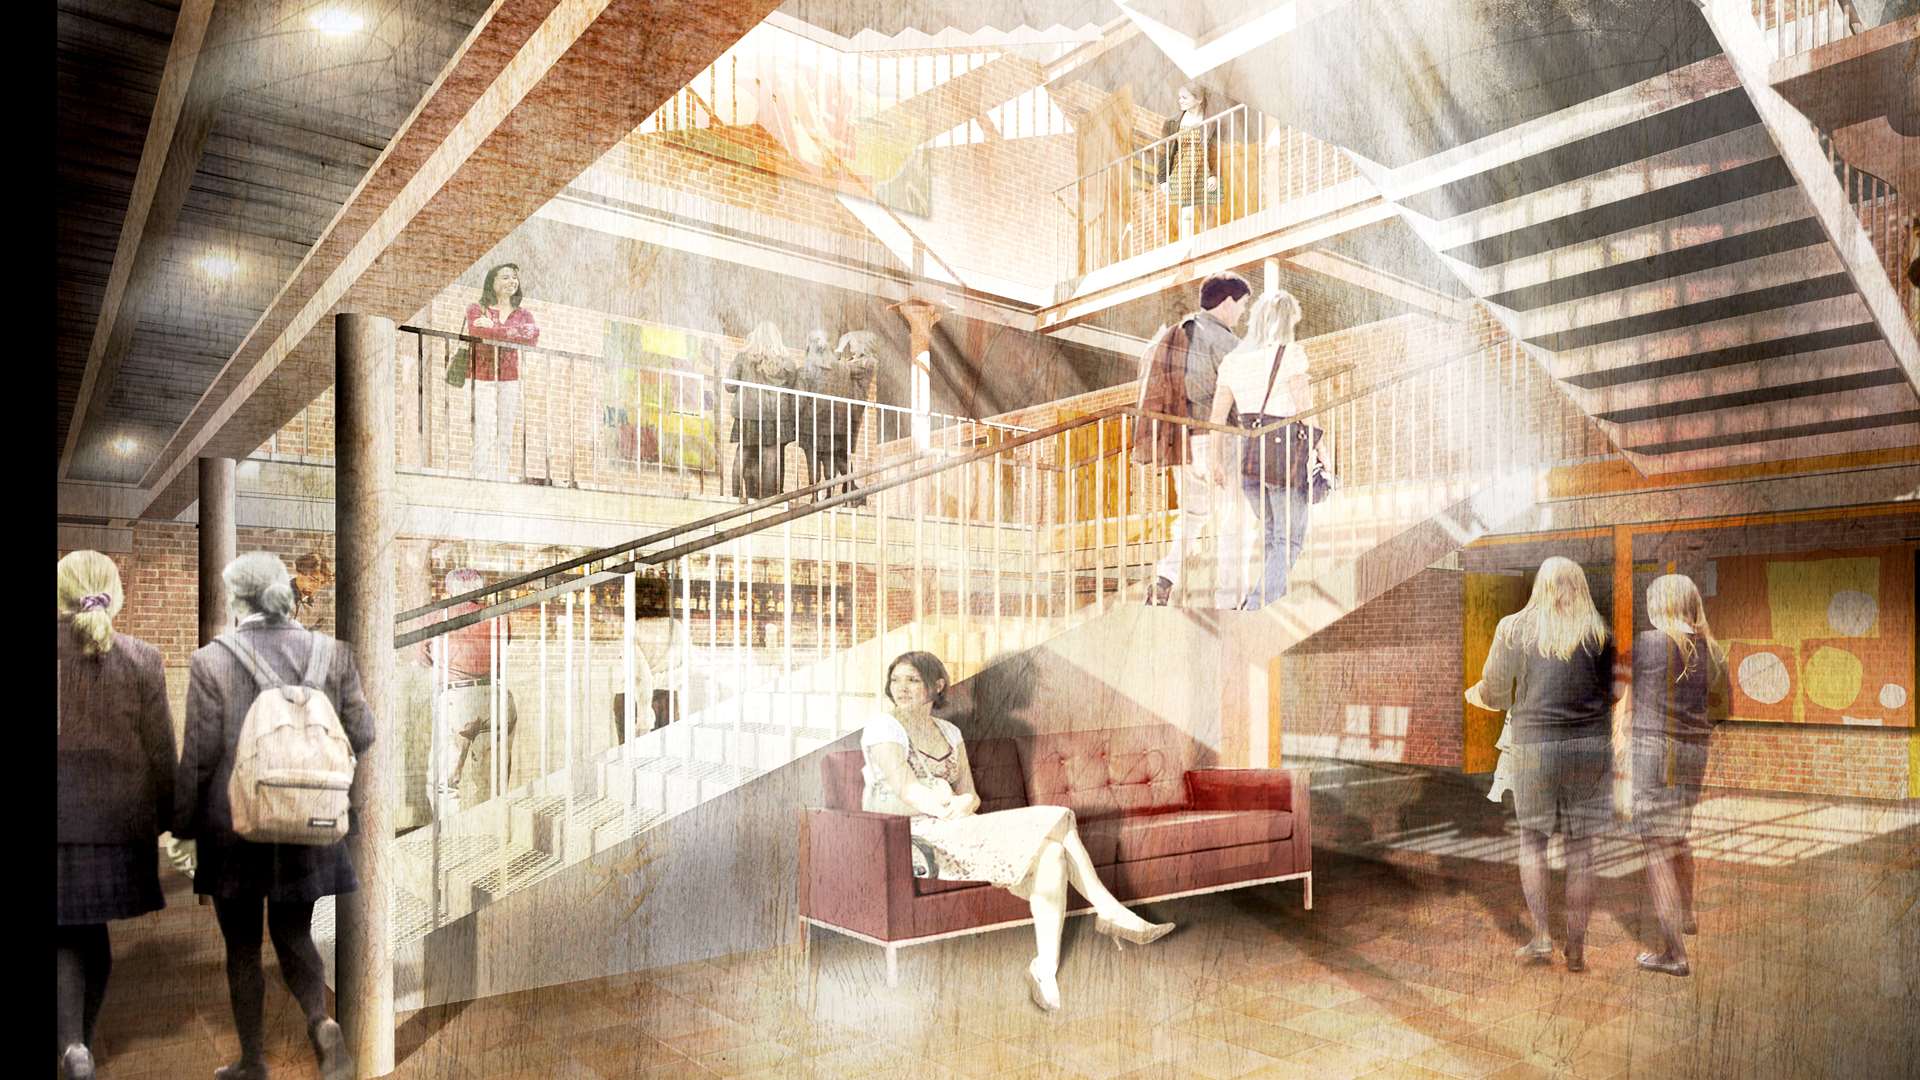 How the foyer of the new theatre could look